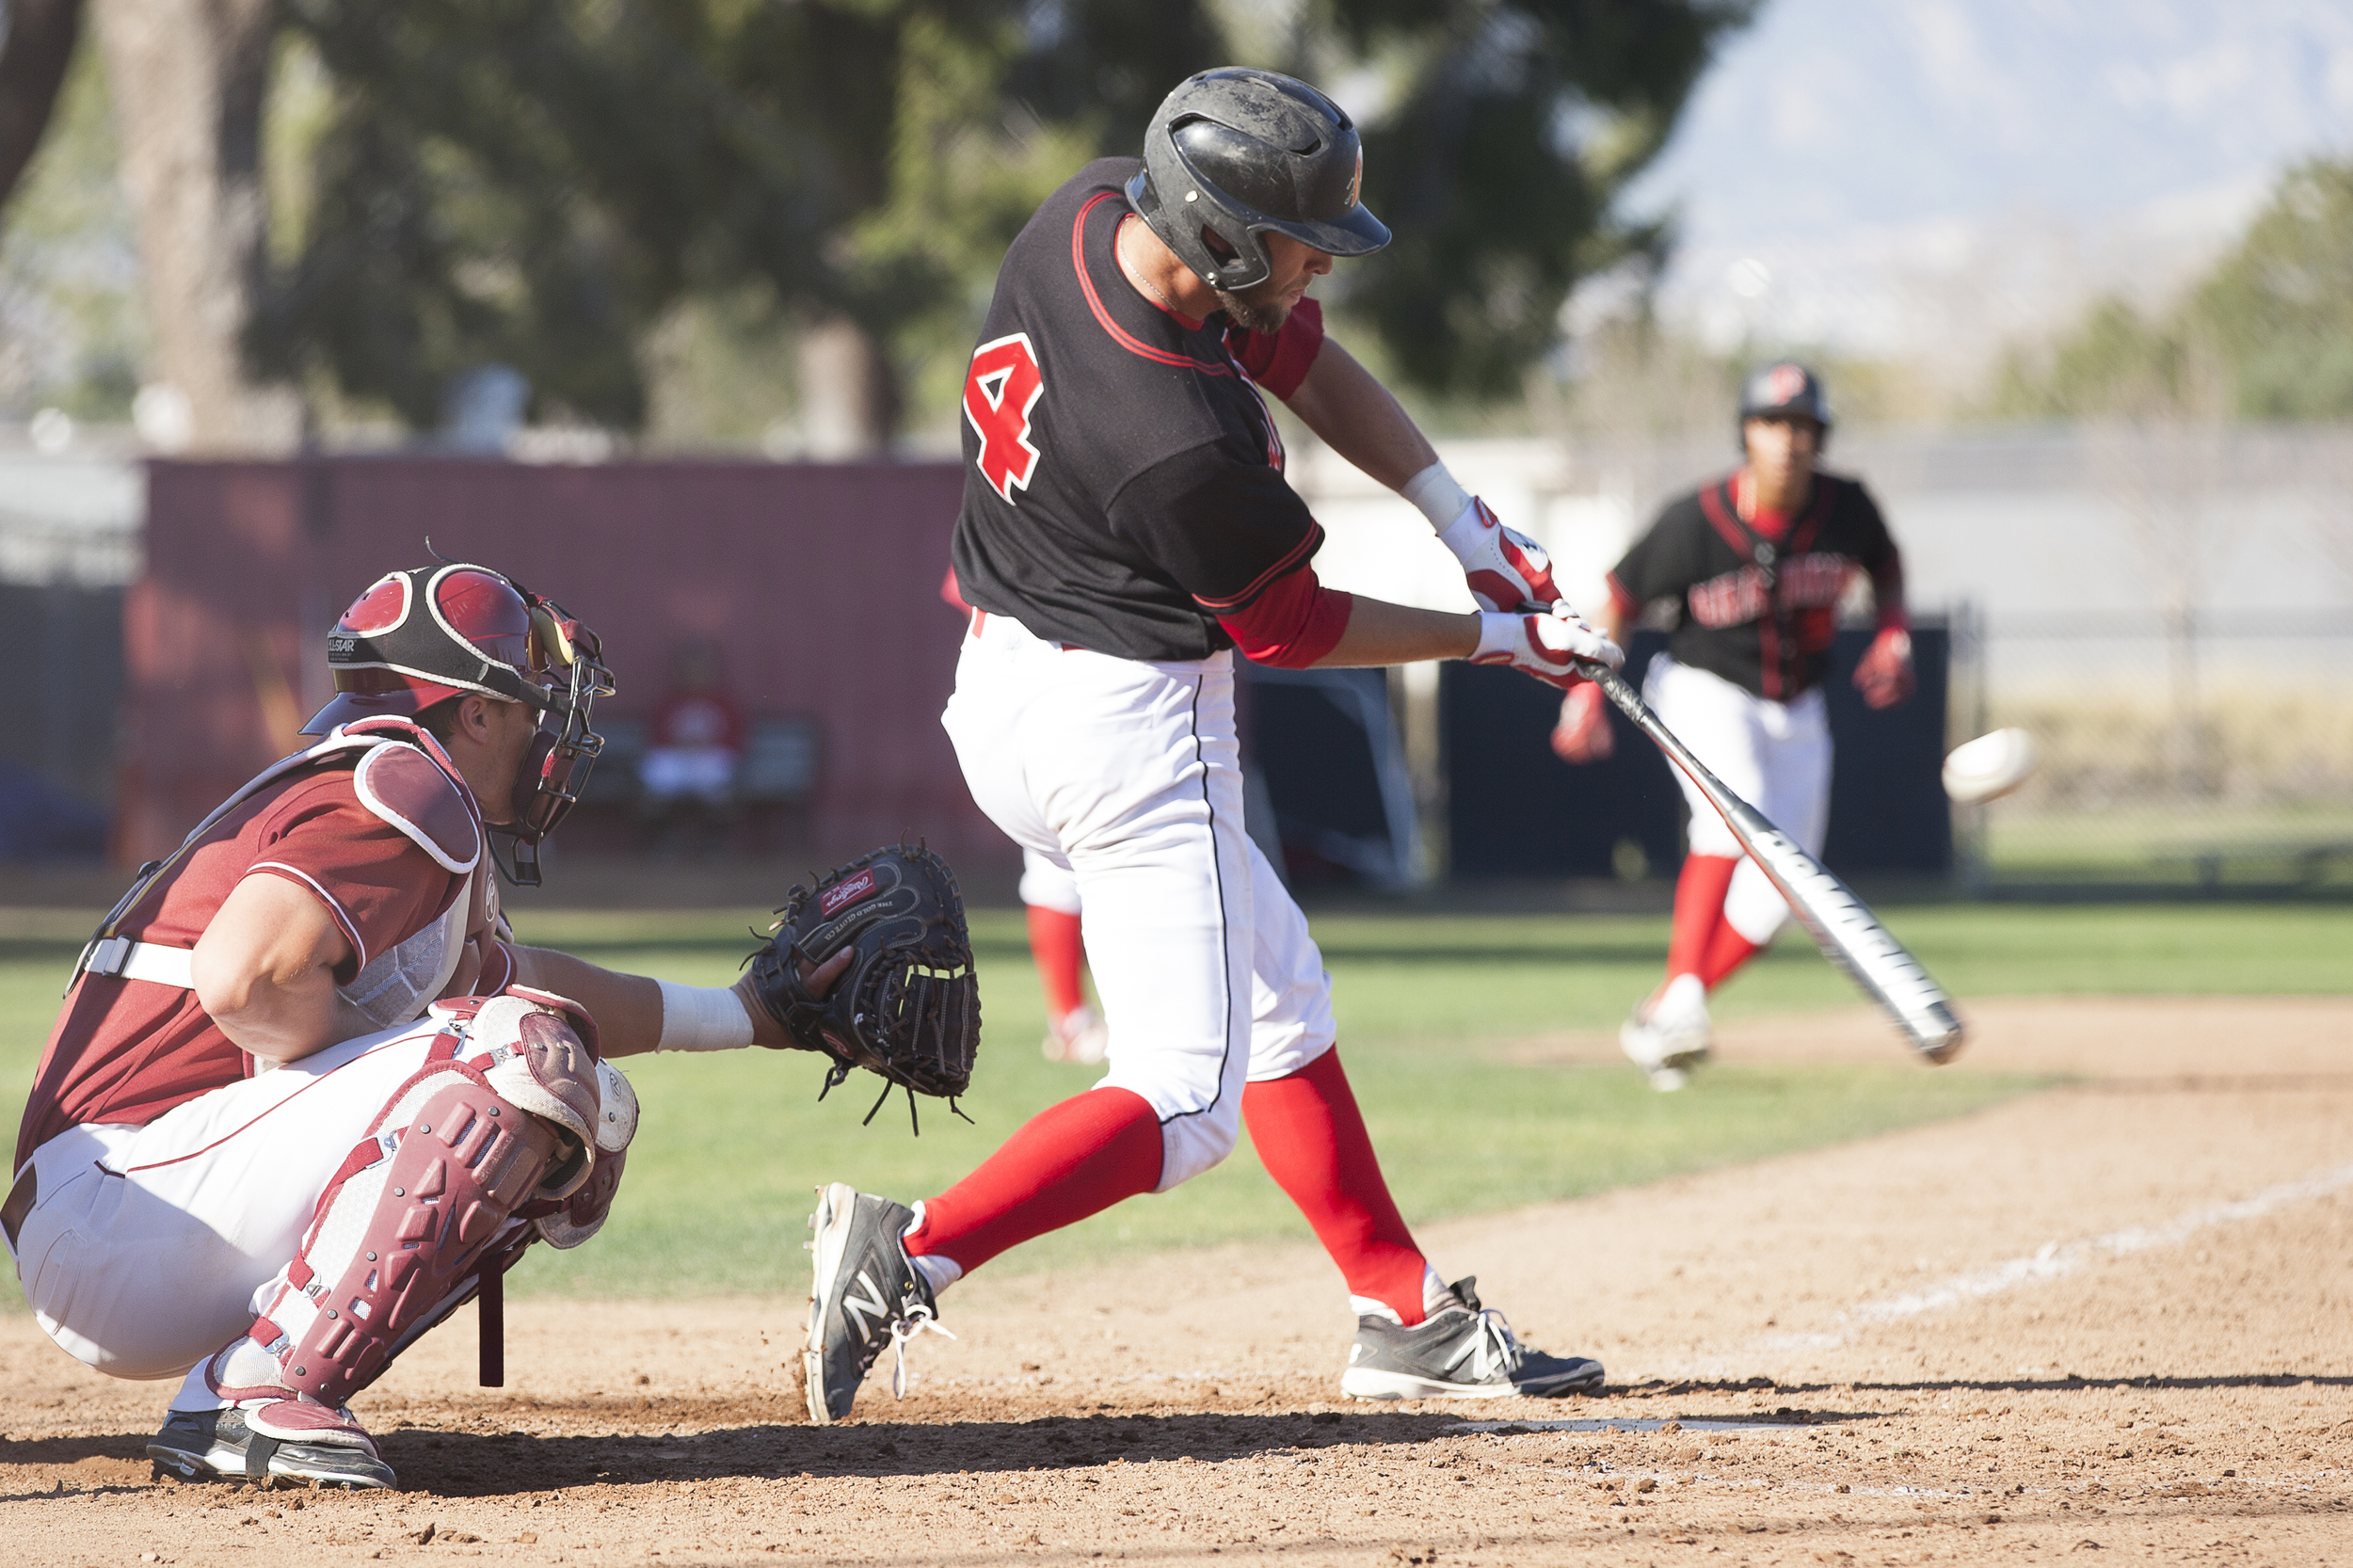  Evan Yeager of Pierce College hits a two-run RBI double to center field with runners in scoring position during a home game in Woodland Hills, Calif. against Glendale College on Saturday, Feb. 13, 2016.&nbsp; 